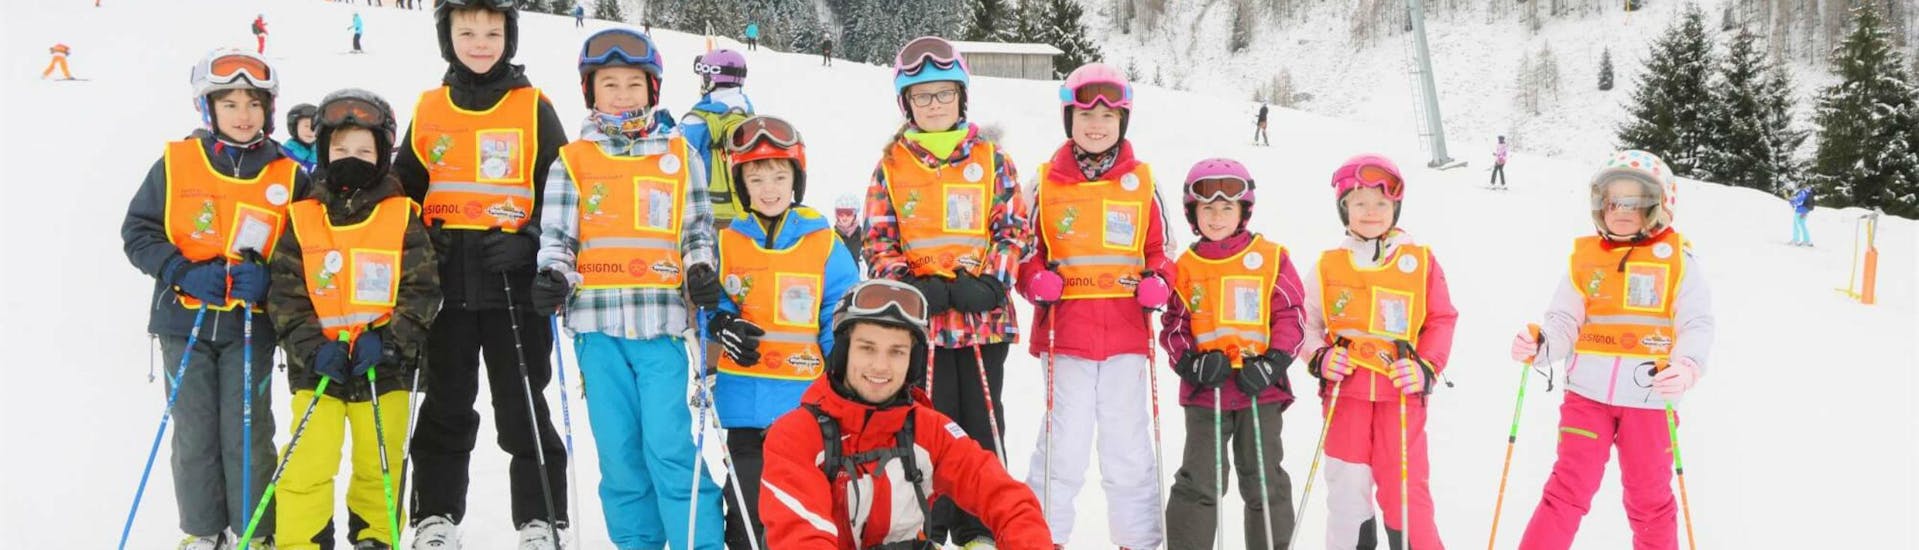 A group of children and their ski instructor from S4 Snowsport Fieberbrunn are smiling at the camera during their Kids Ski Lessons "Juniors programme" (15-18 years).